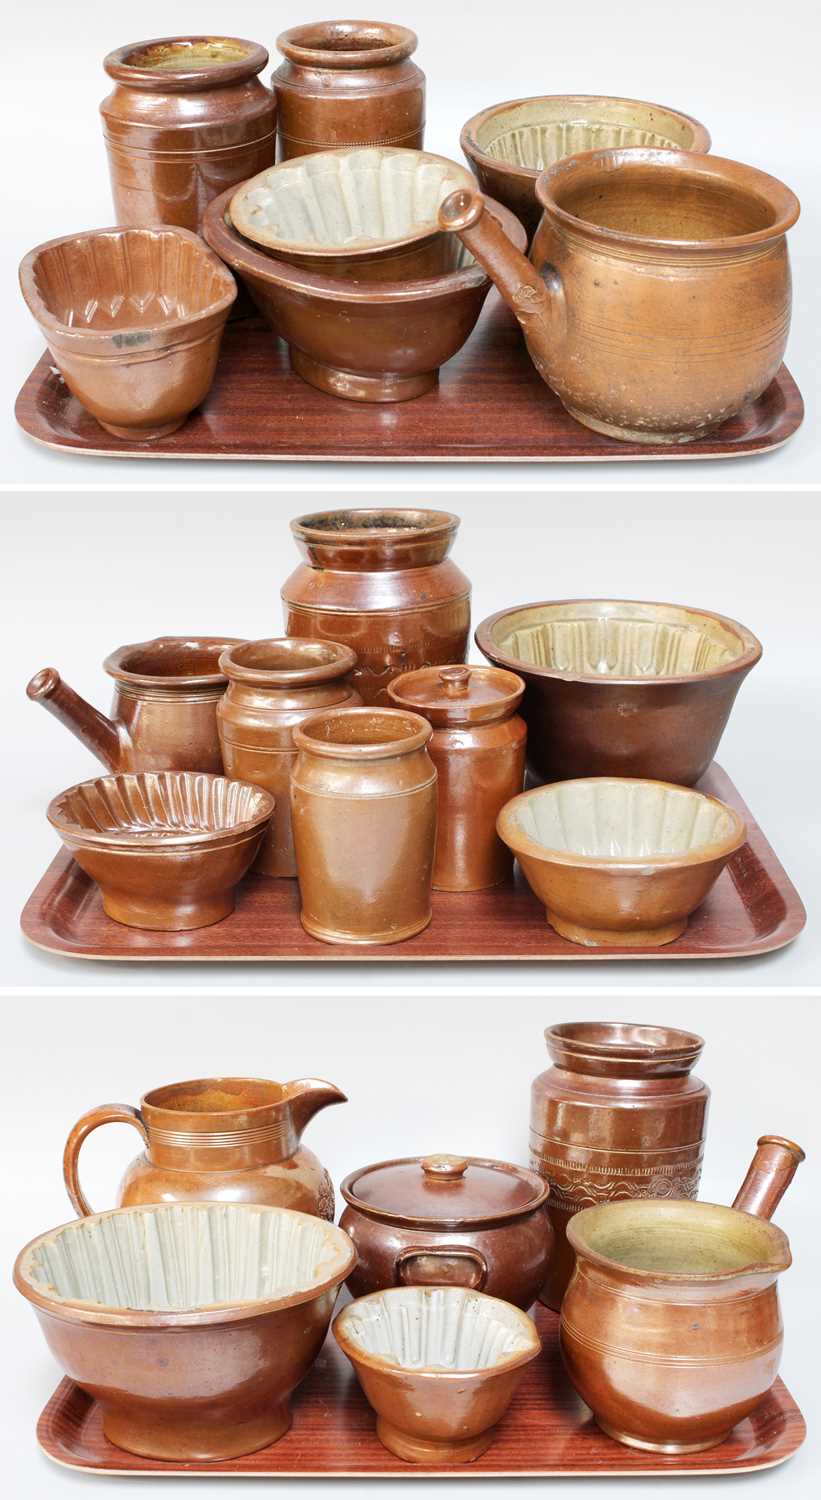 A Collection of Salt Glazed Stoneware, 19th century, various forms, mainly jelly moulds, including